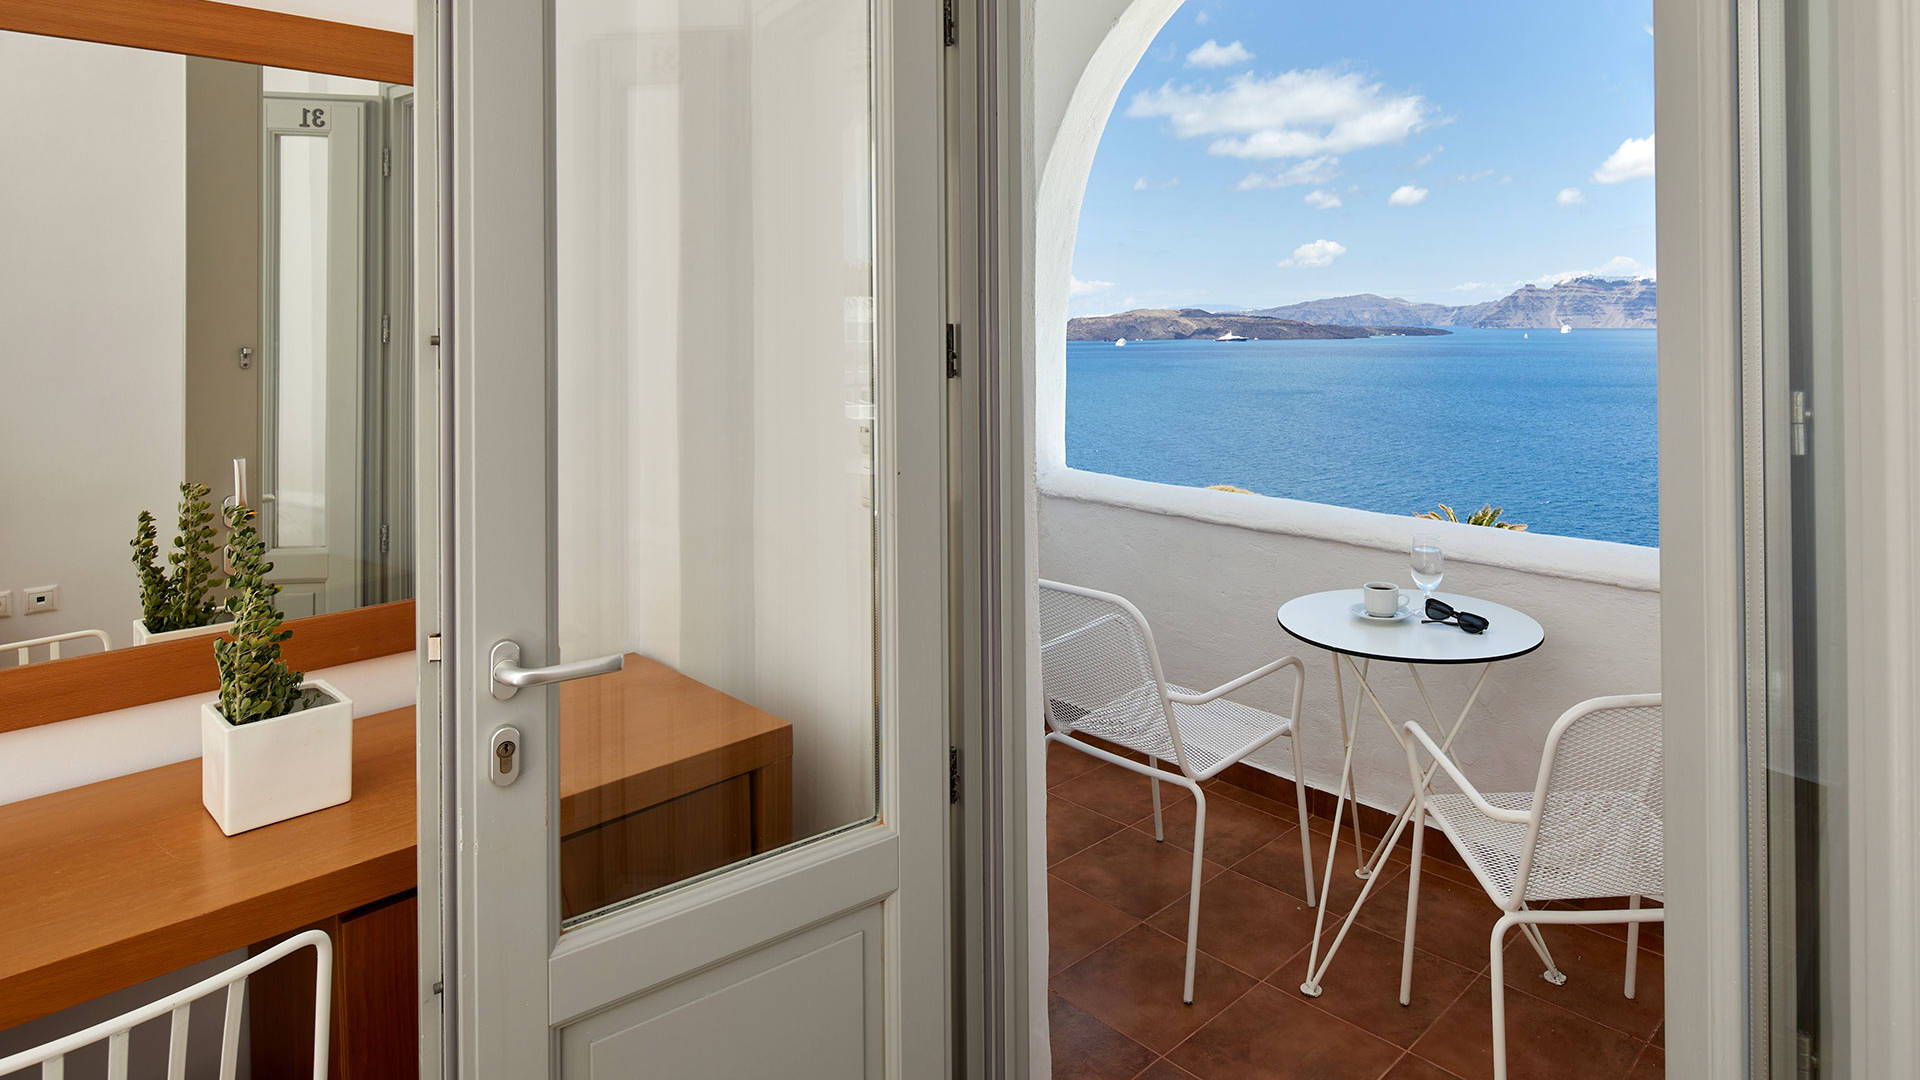 
Santorini View Hotel room with white door to sea view balcony with table and chairs